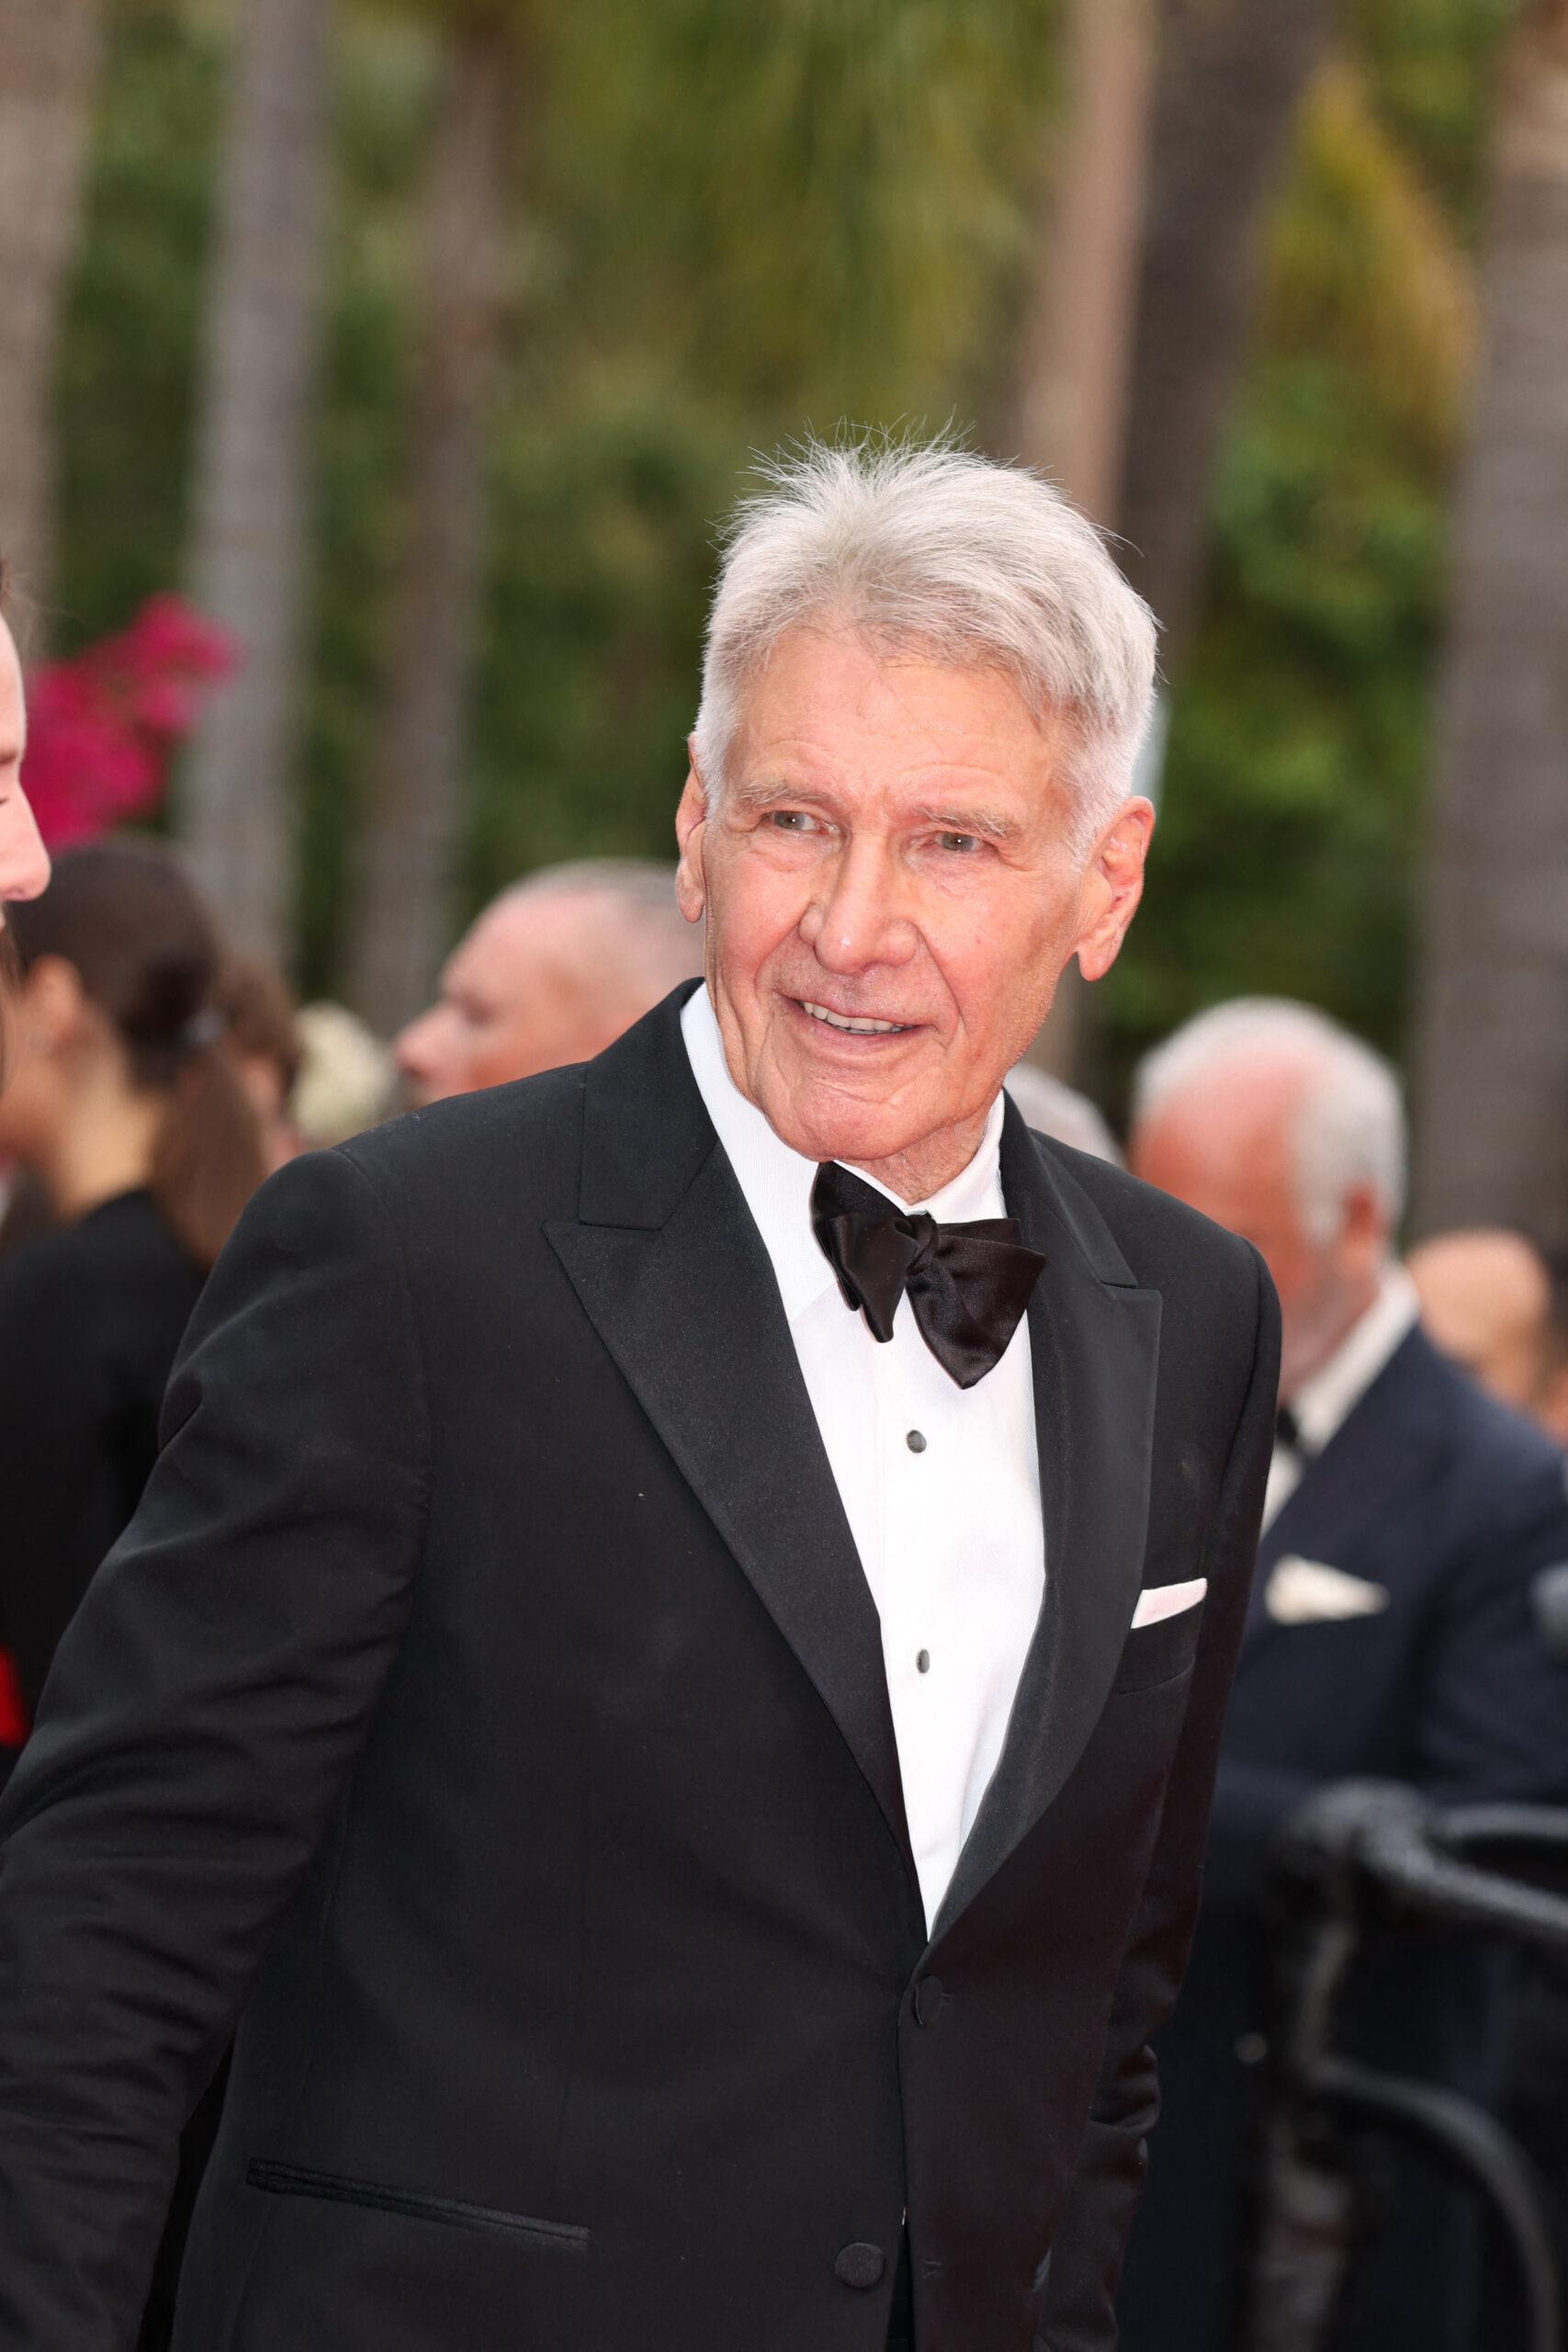 Harrison Ford at the Cannes Film Festival premiere of 'Indiana Jones 5'Harrison Ford at the Cannes Film Festival premiere of 'Indiana Jones 5'